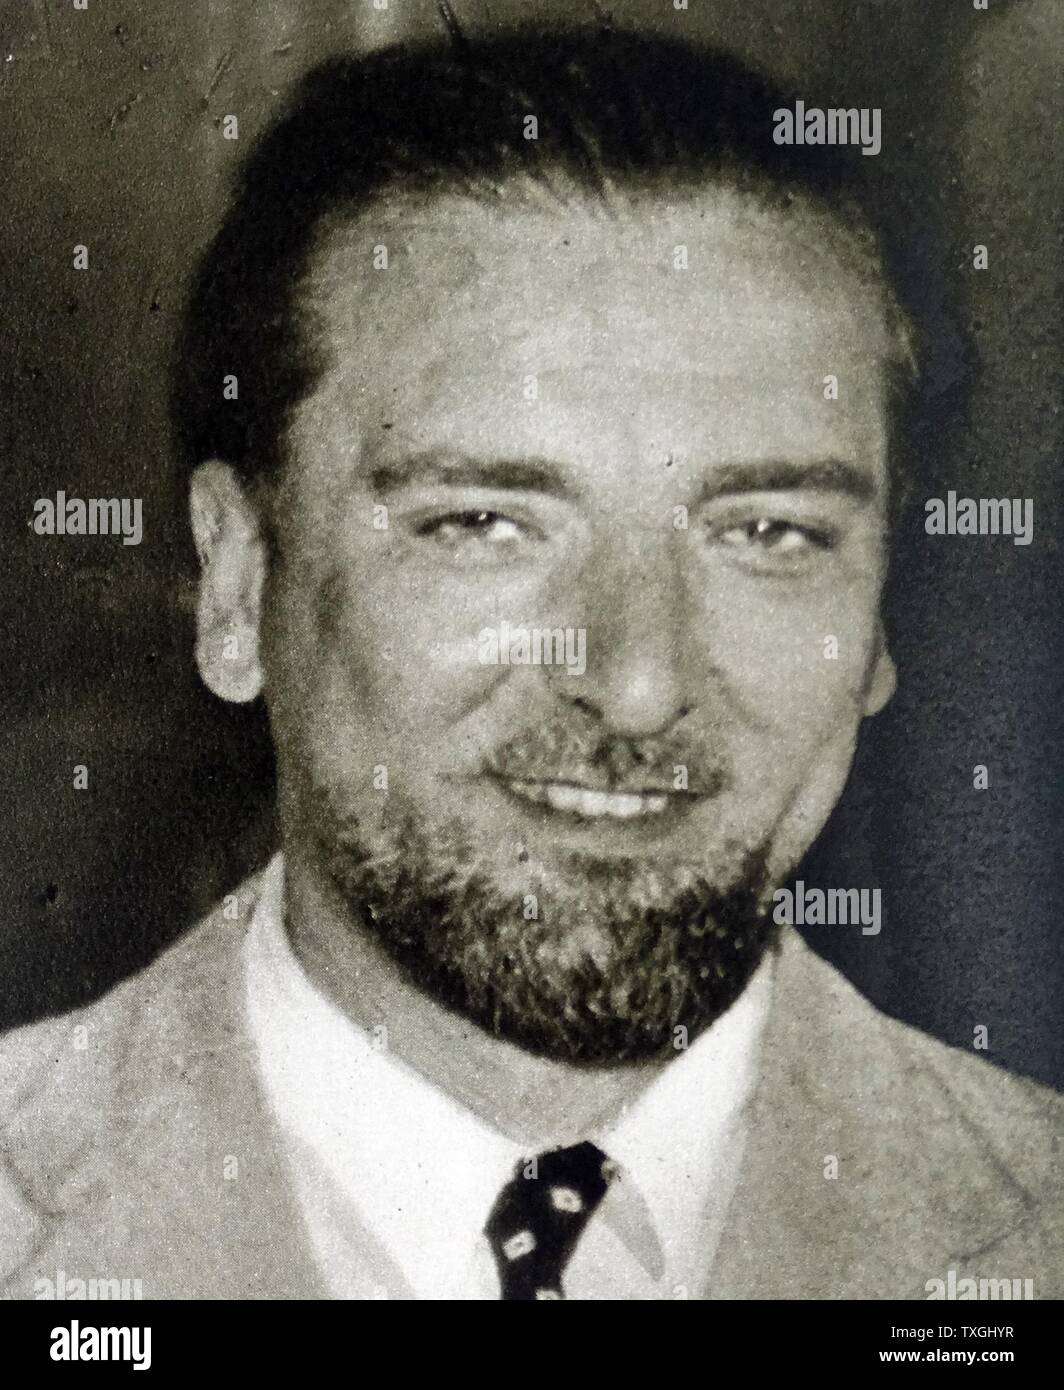 Dino Grandi (4 June 1895 ñ 21 May 1988), Italian Fascist politician, minister of justice, minister of foreign affairs and president of parliament. Stock Photo